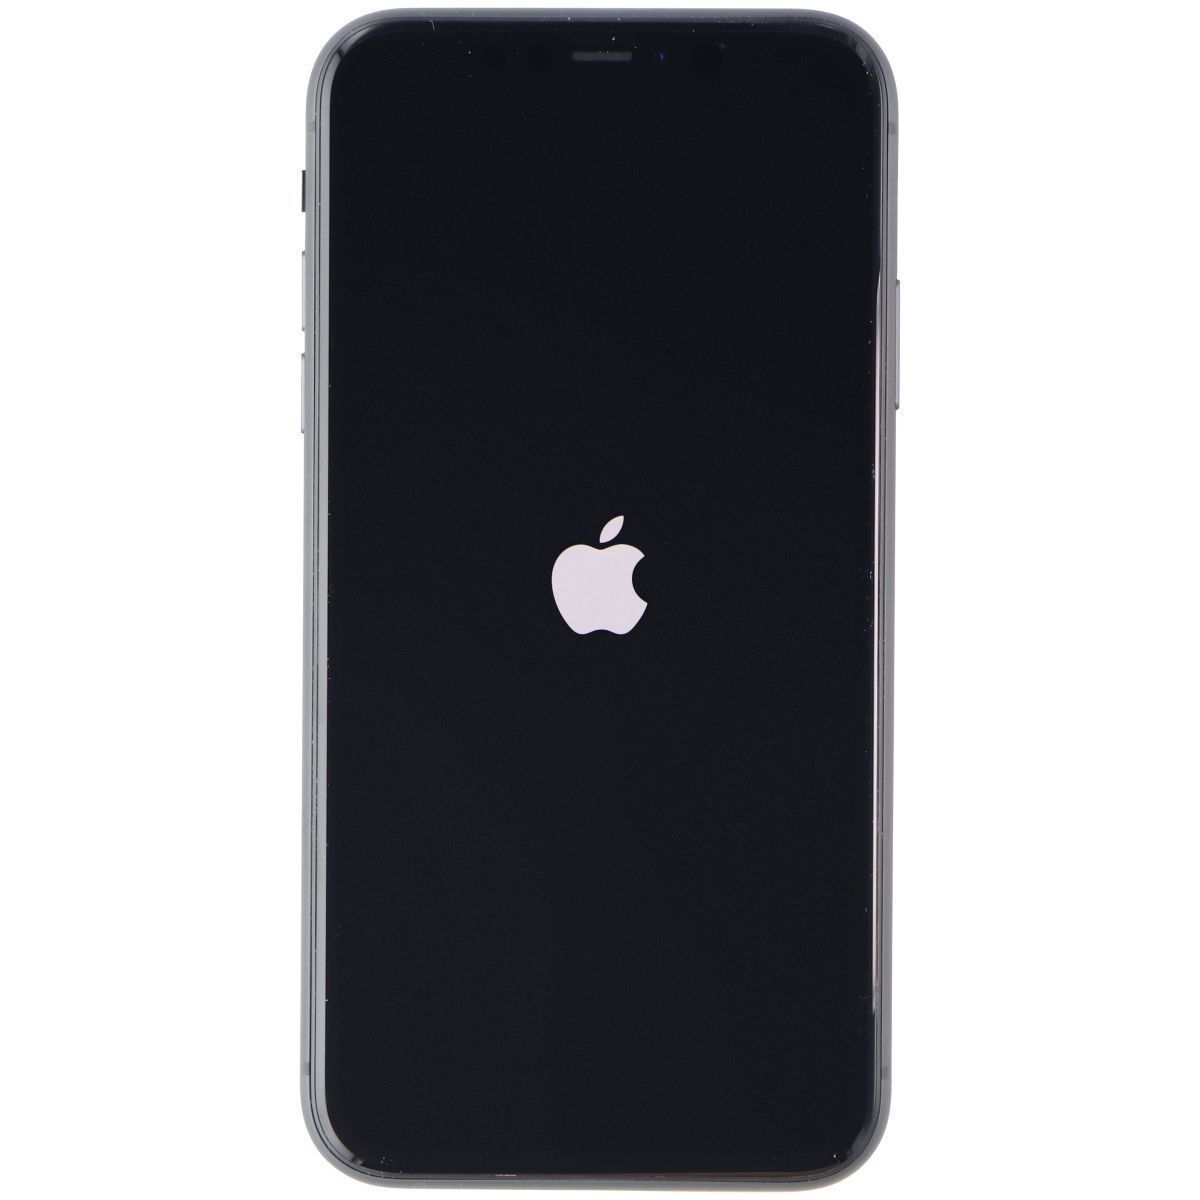 Apple iPhone 11 (6.1-inch) Smartphone (A2111) Dish Boost ONLY - 64GB / Black